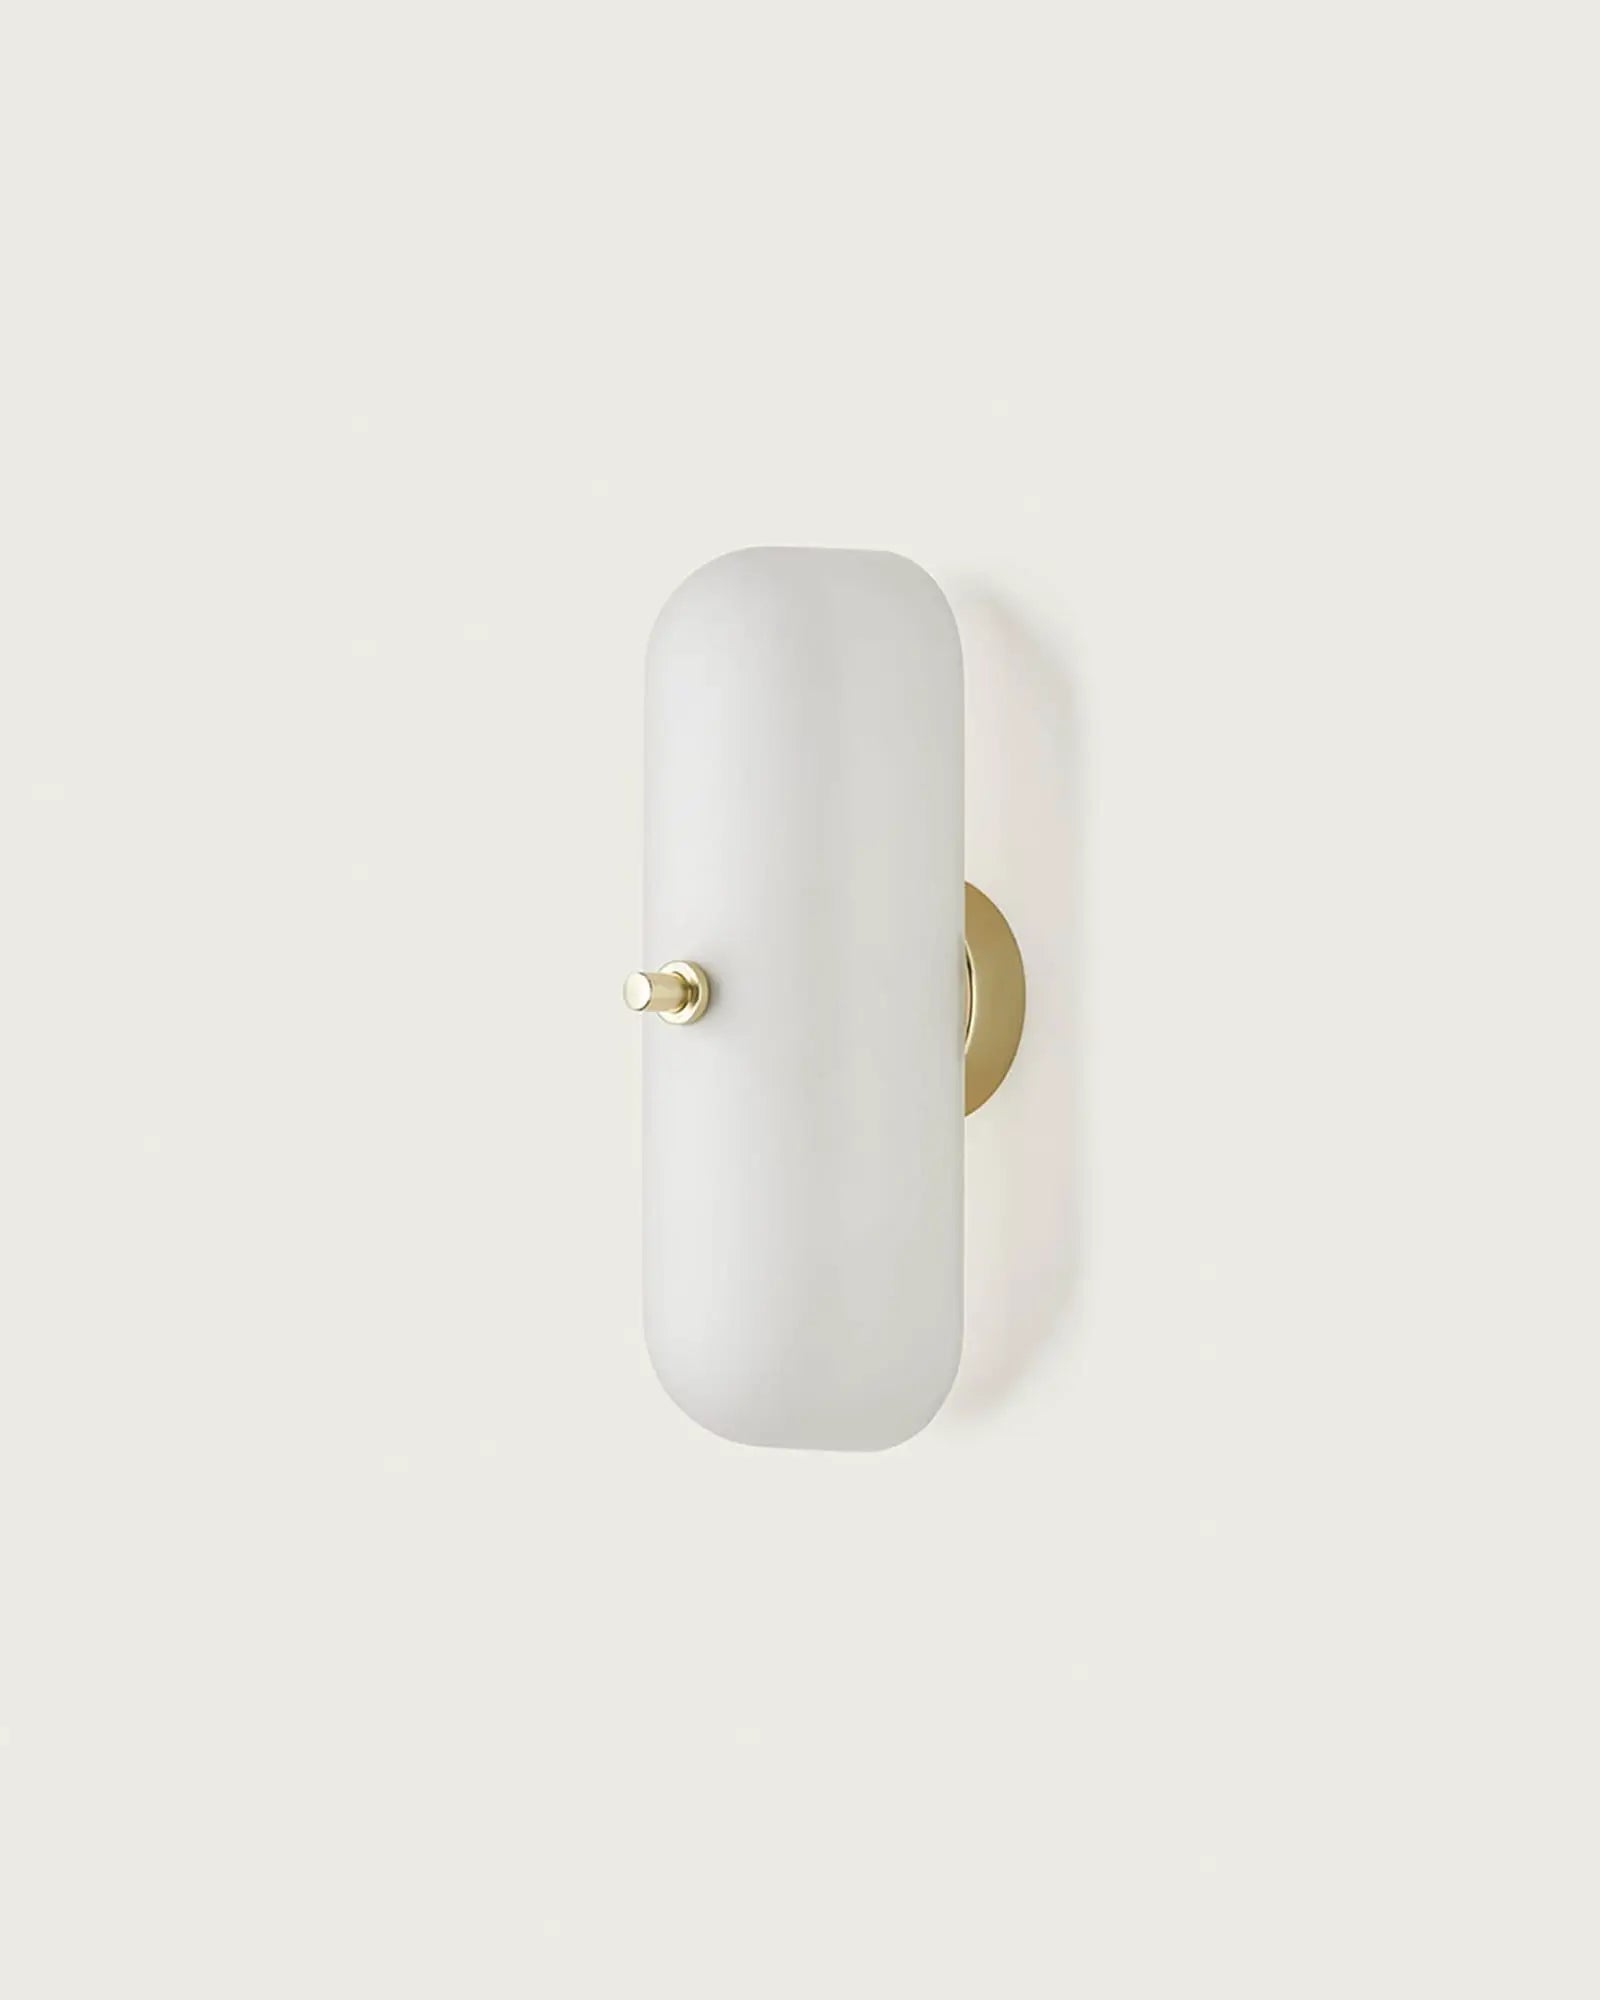 Atil contemporary opal glass and brass wall light